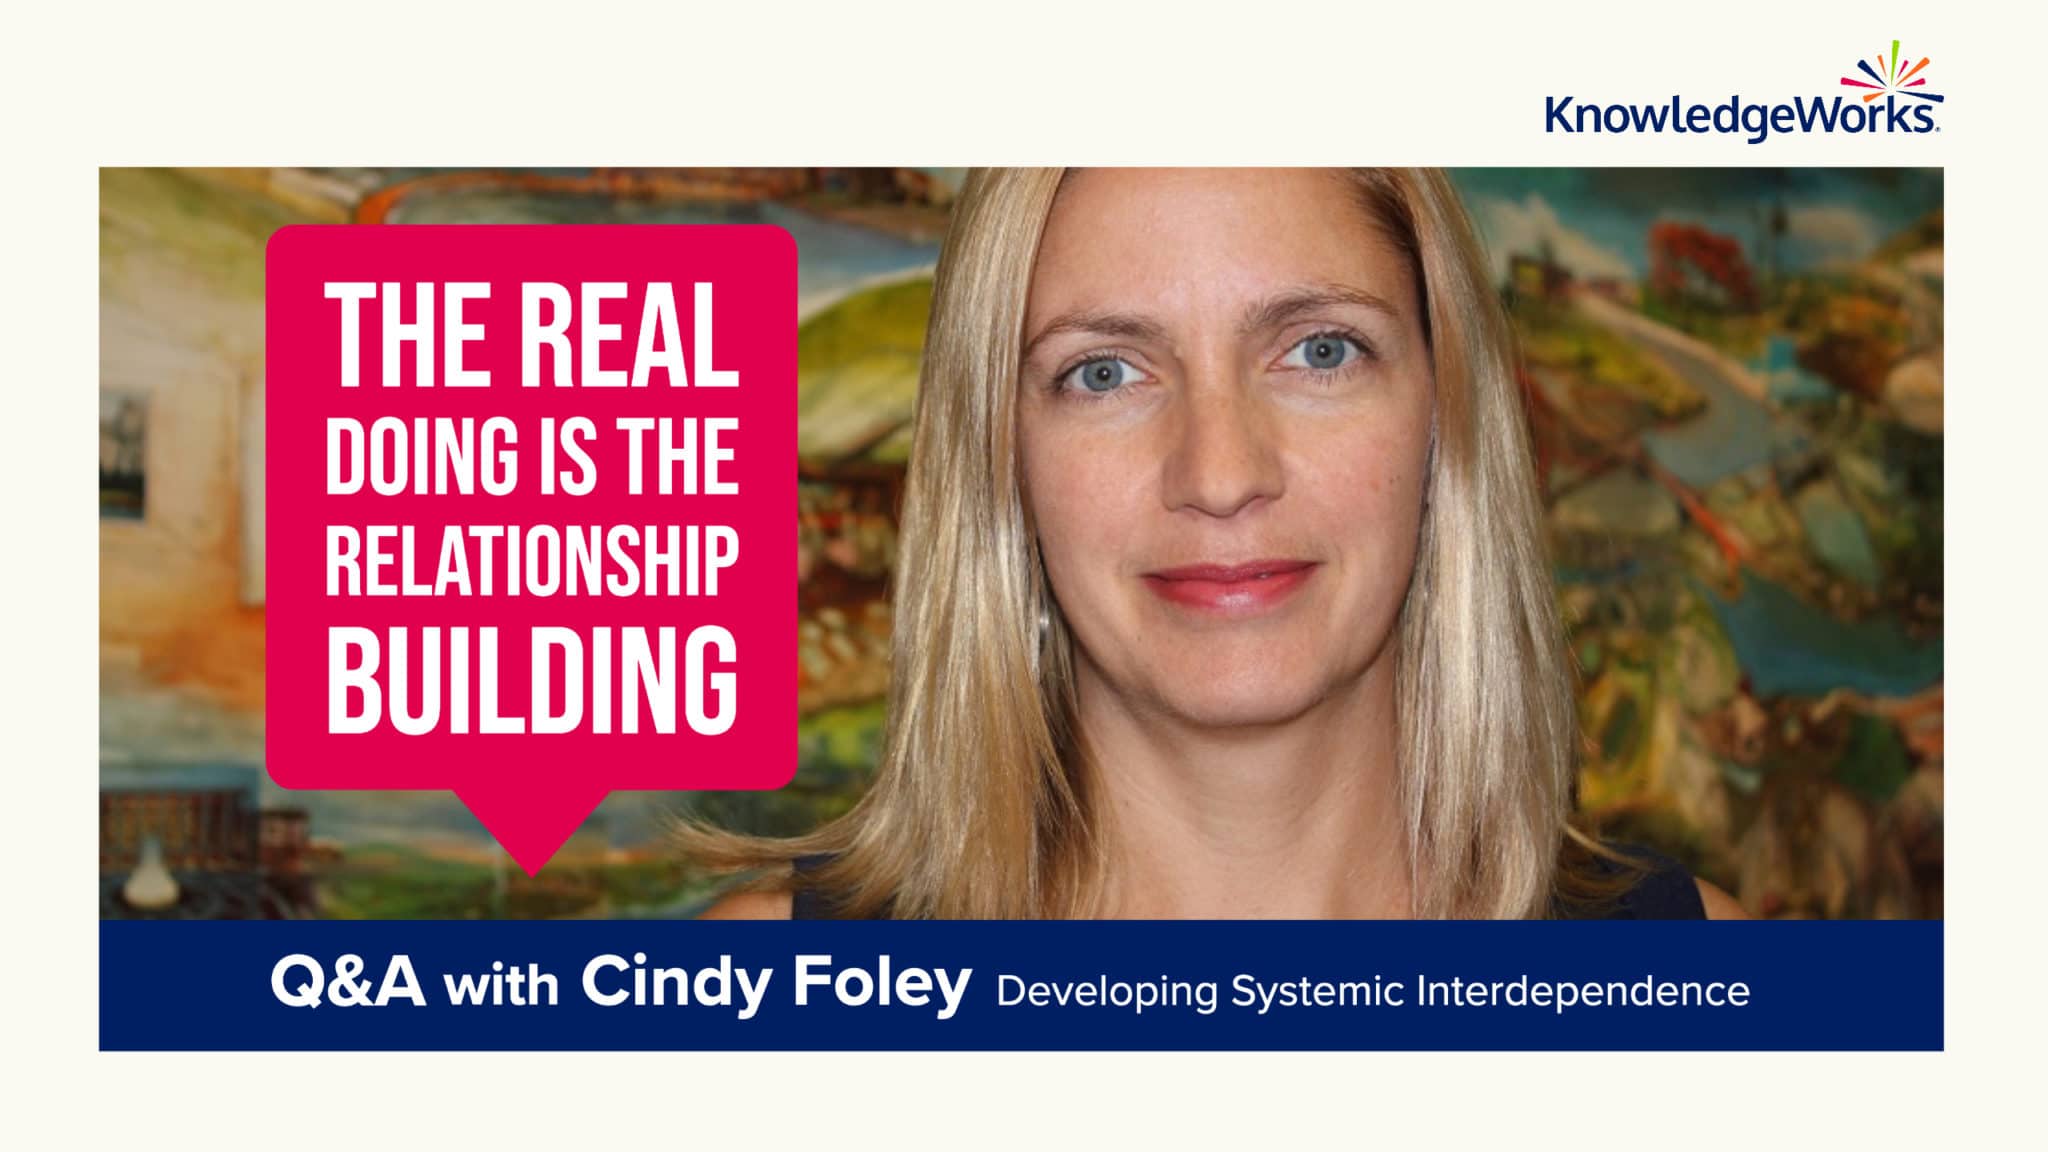 KnowledgeWorks Q&A with Cindy Foley from Columbus Museum of Art. She says, "The real doing is the relationship building."